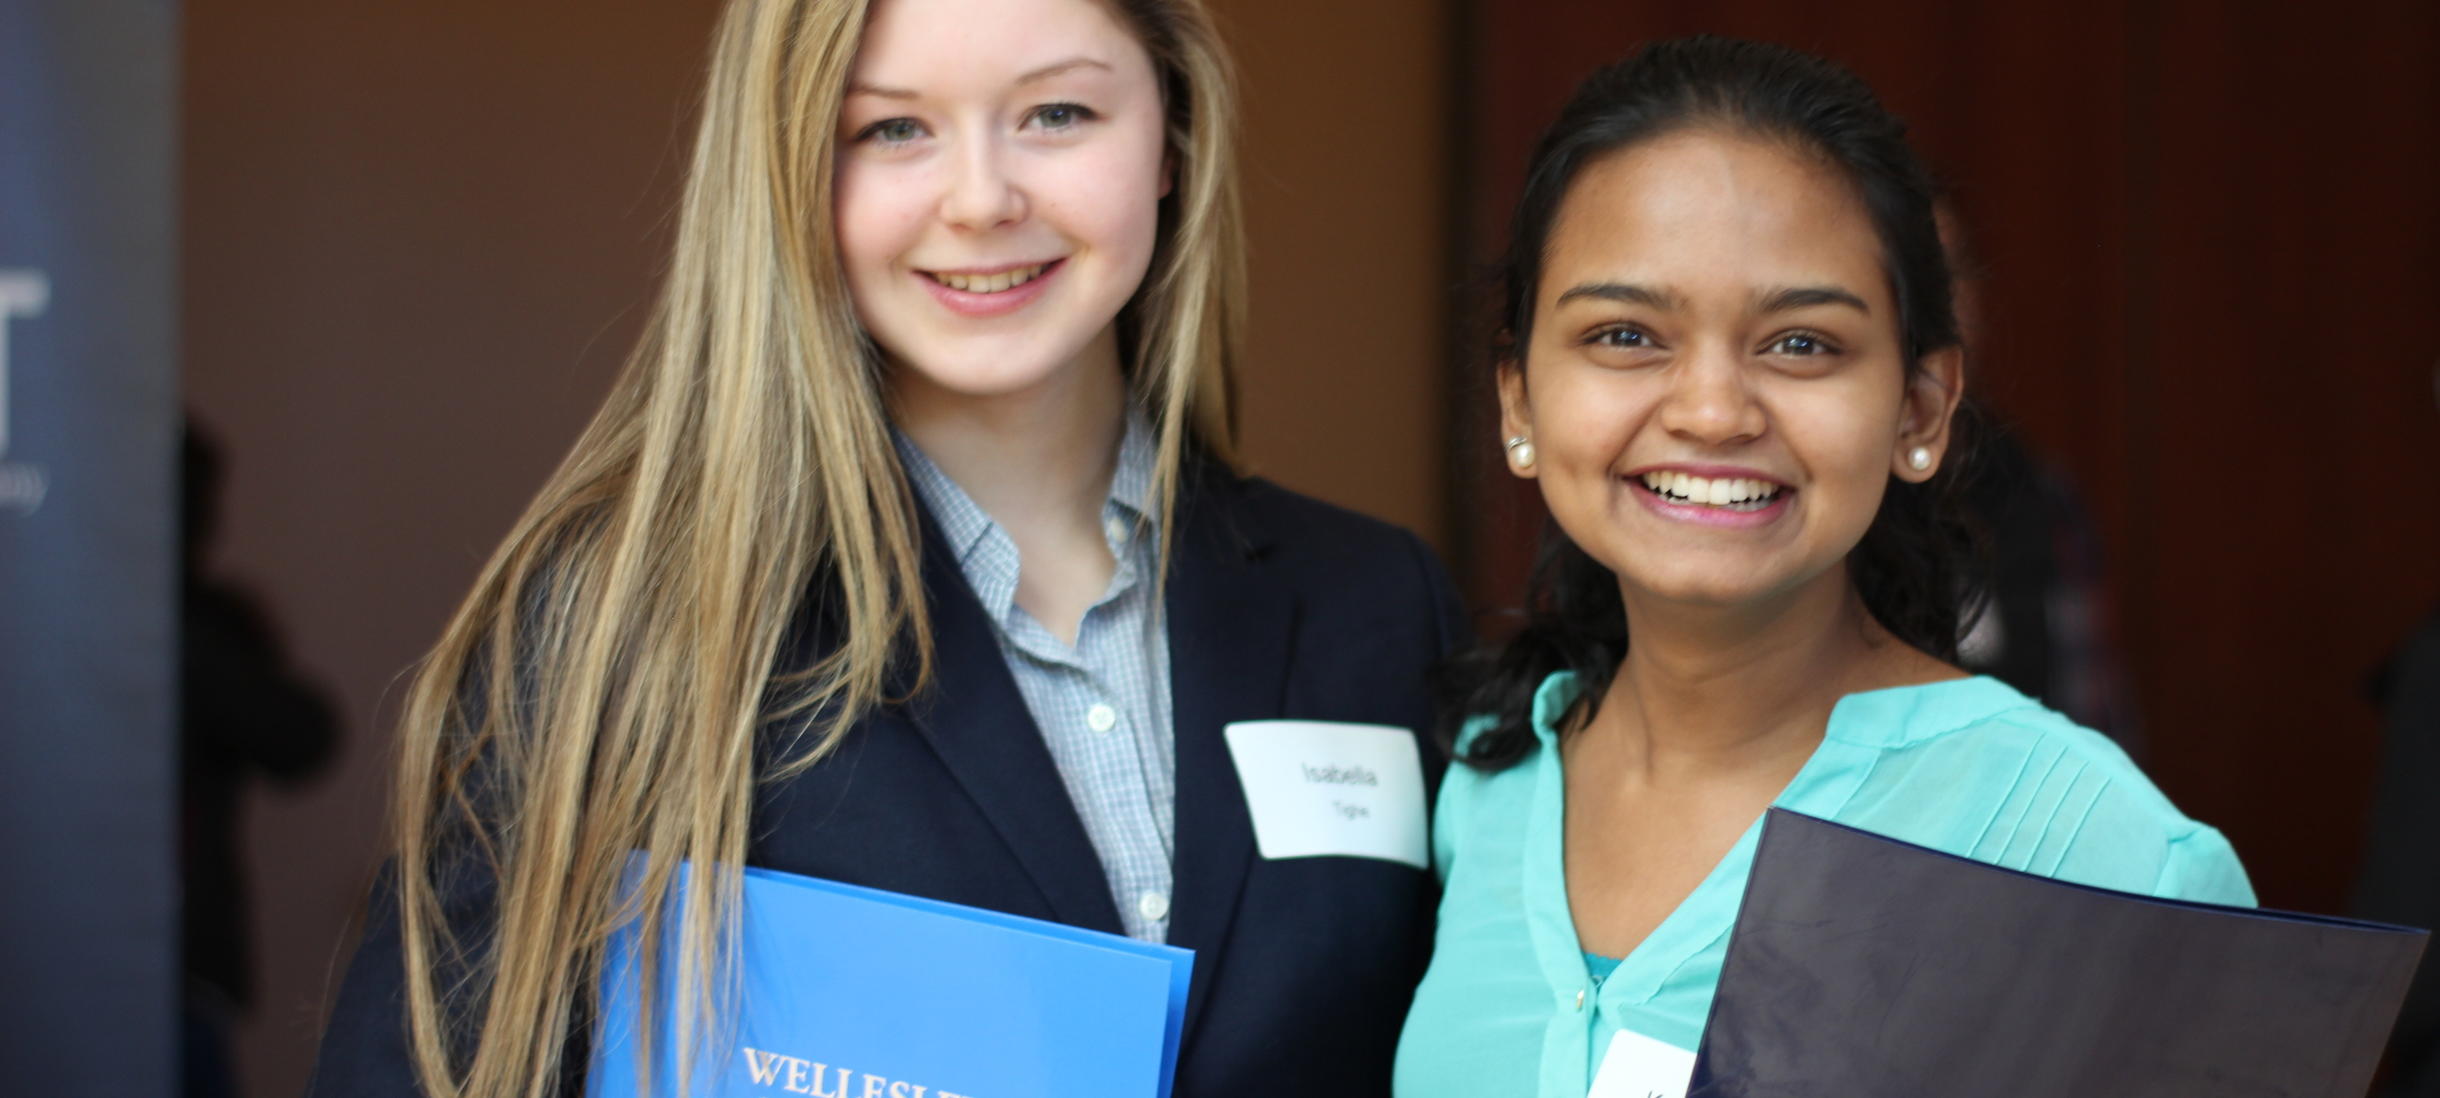 Two students smiling holding Wellesley College folios